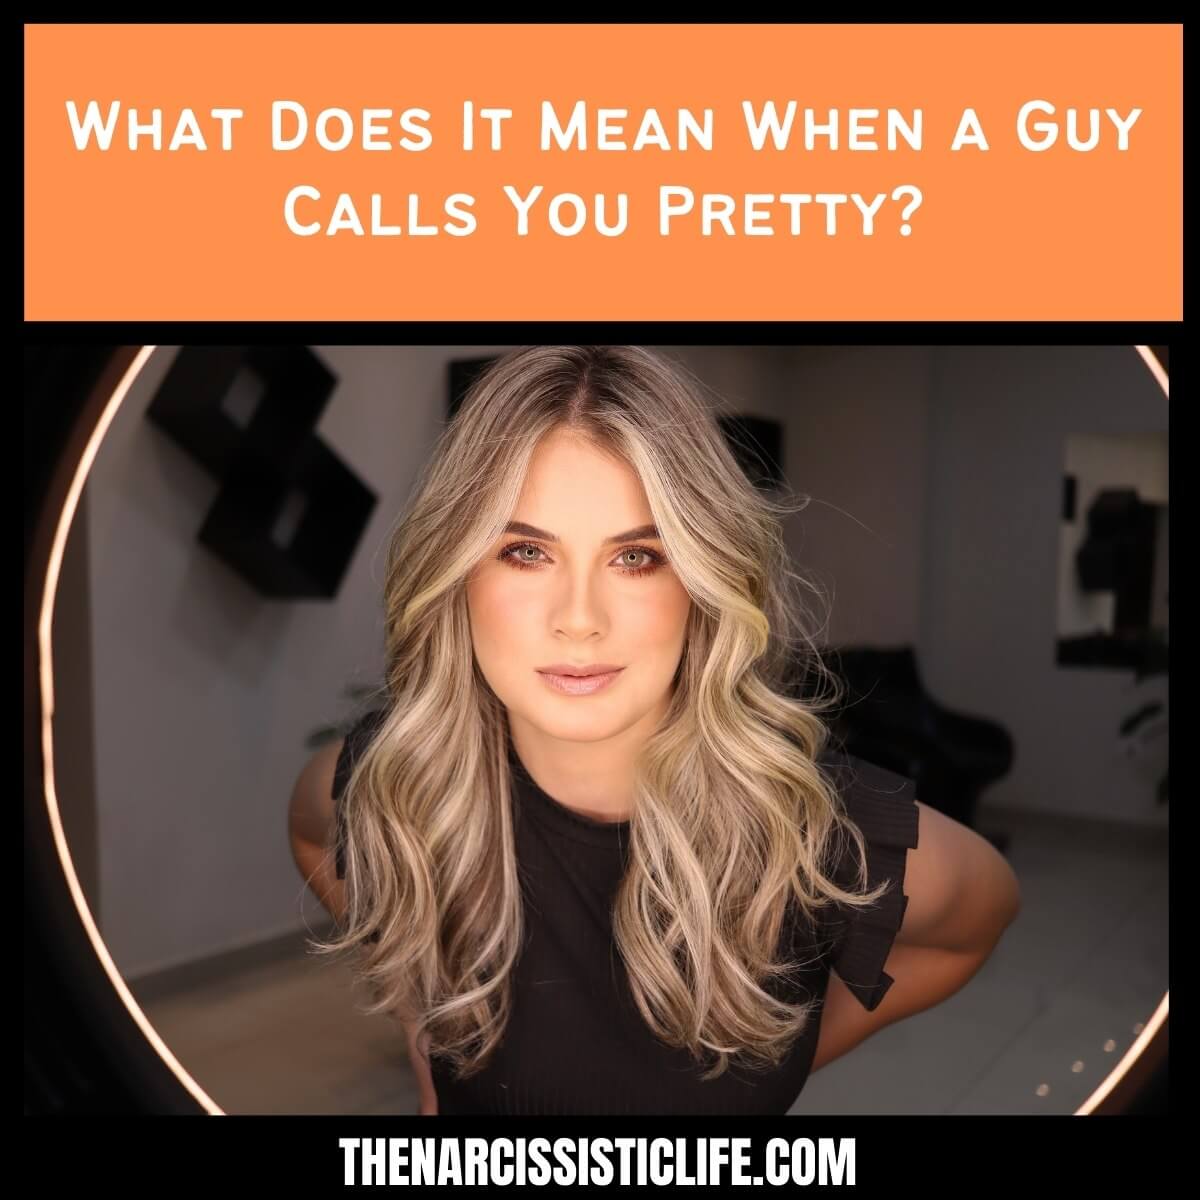 What Does It Mean When a Guy Calls You Pretty